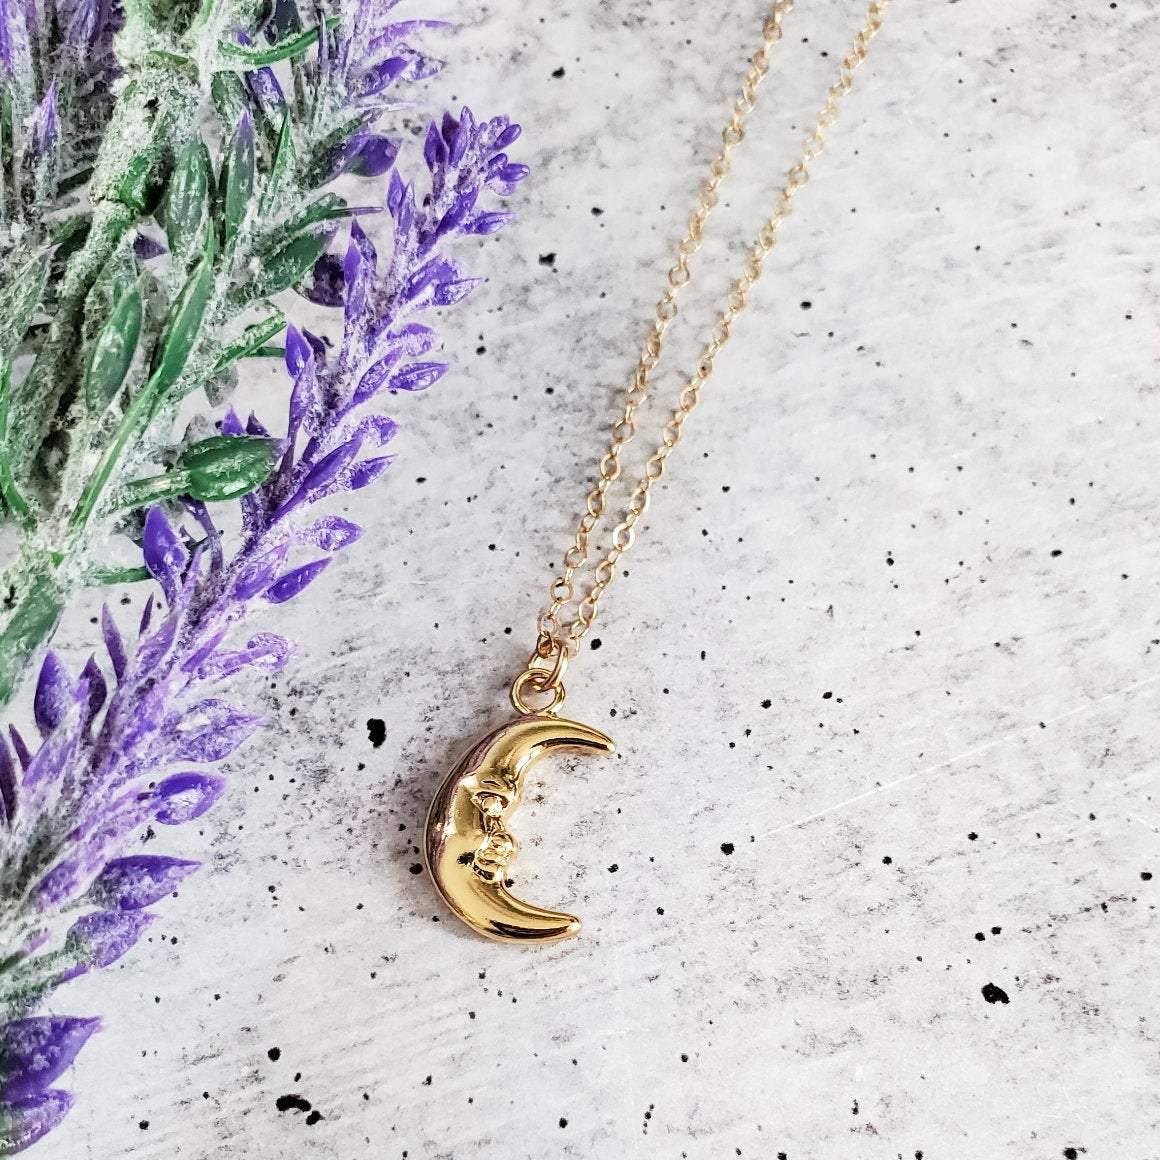 Man in the Moon Gold Necklace - Ready to Ship Salt and Sparkle